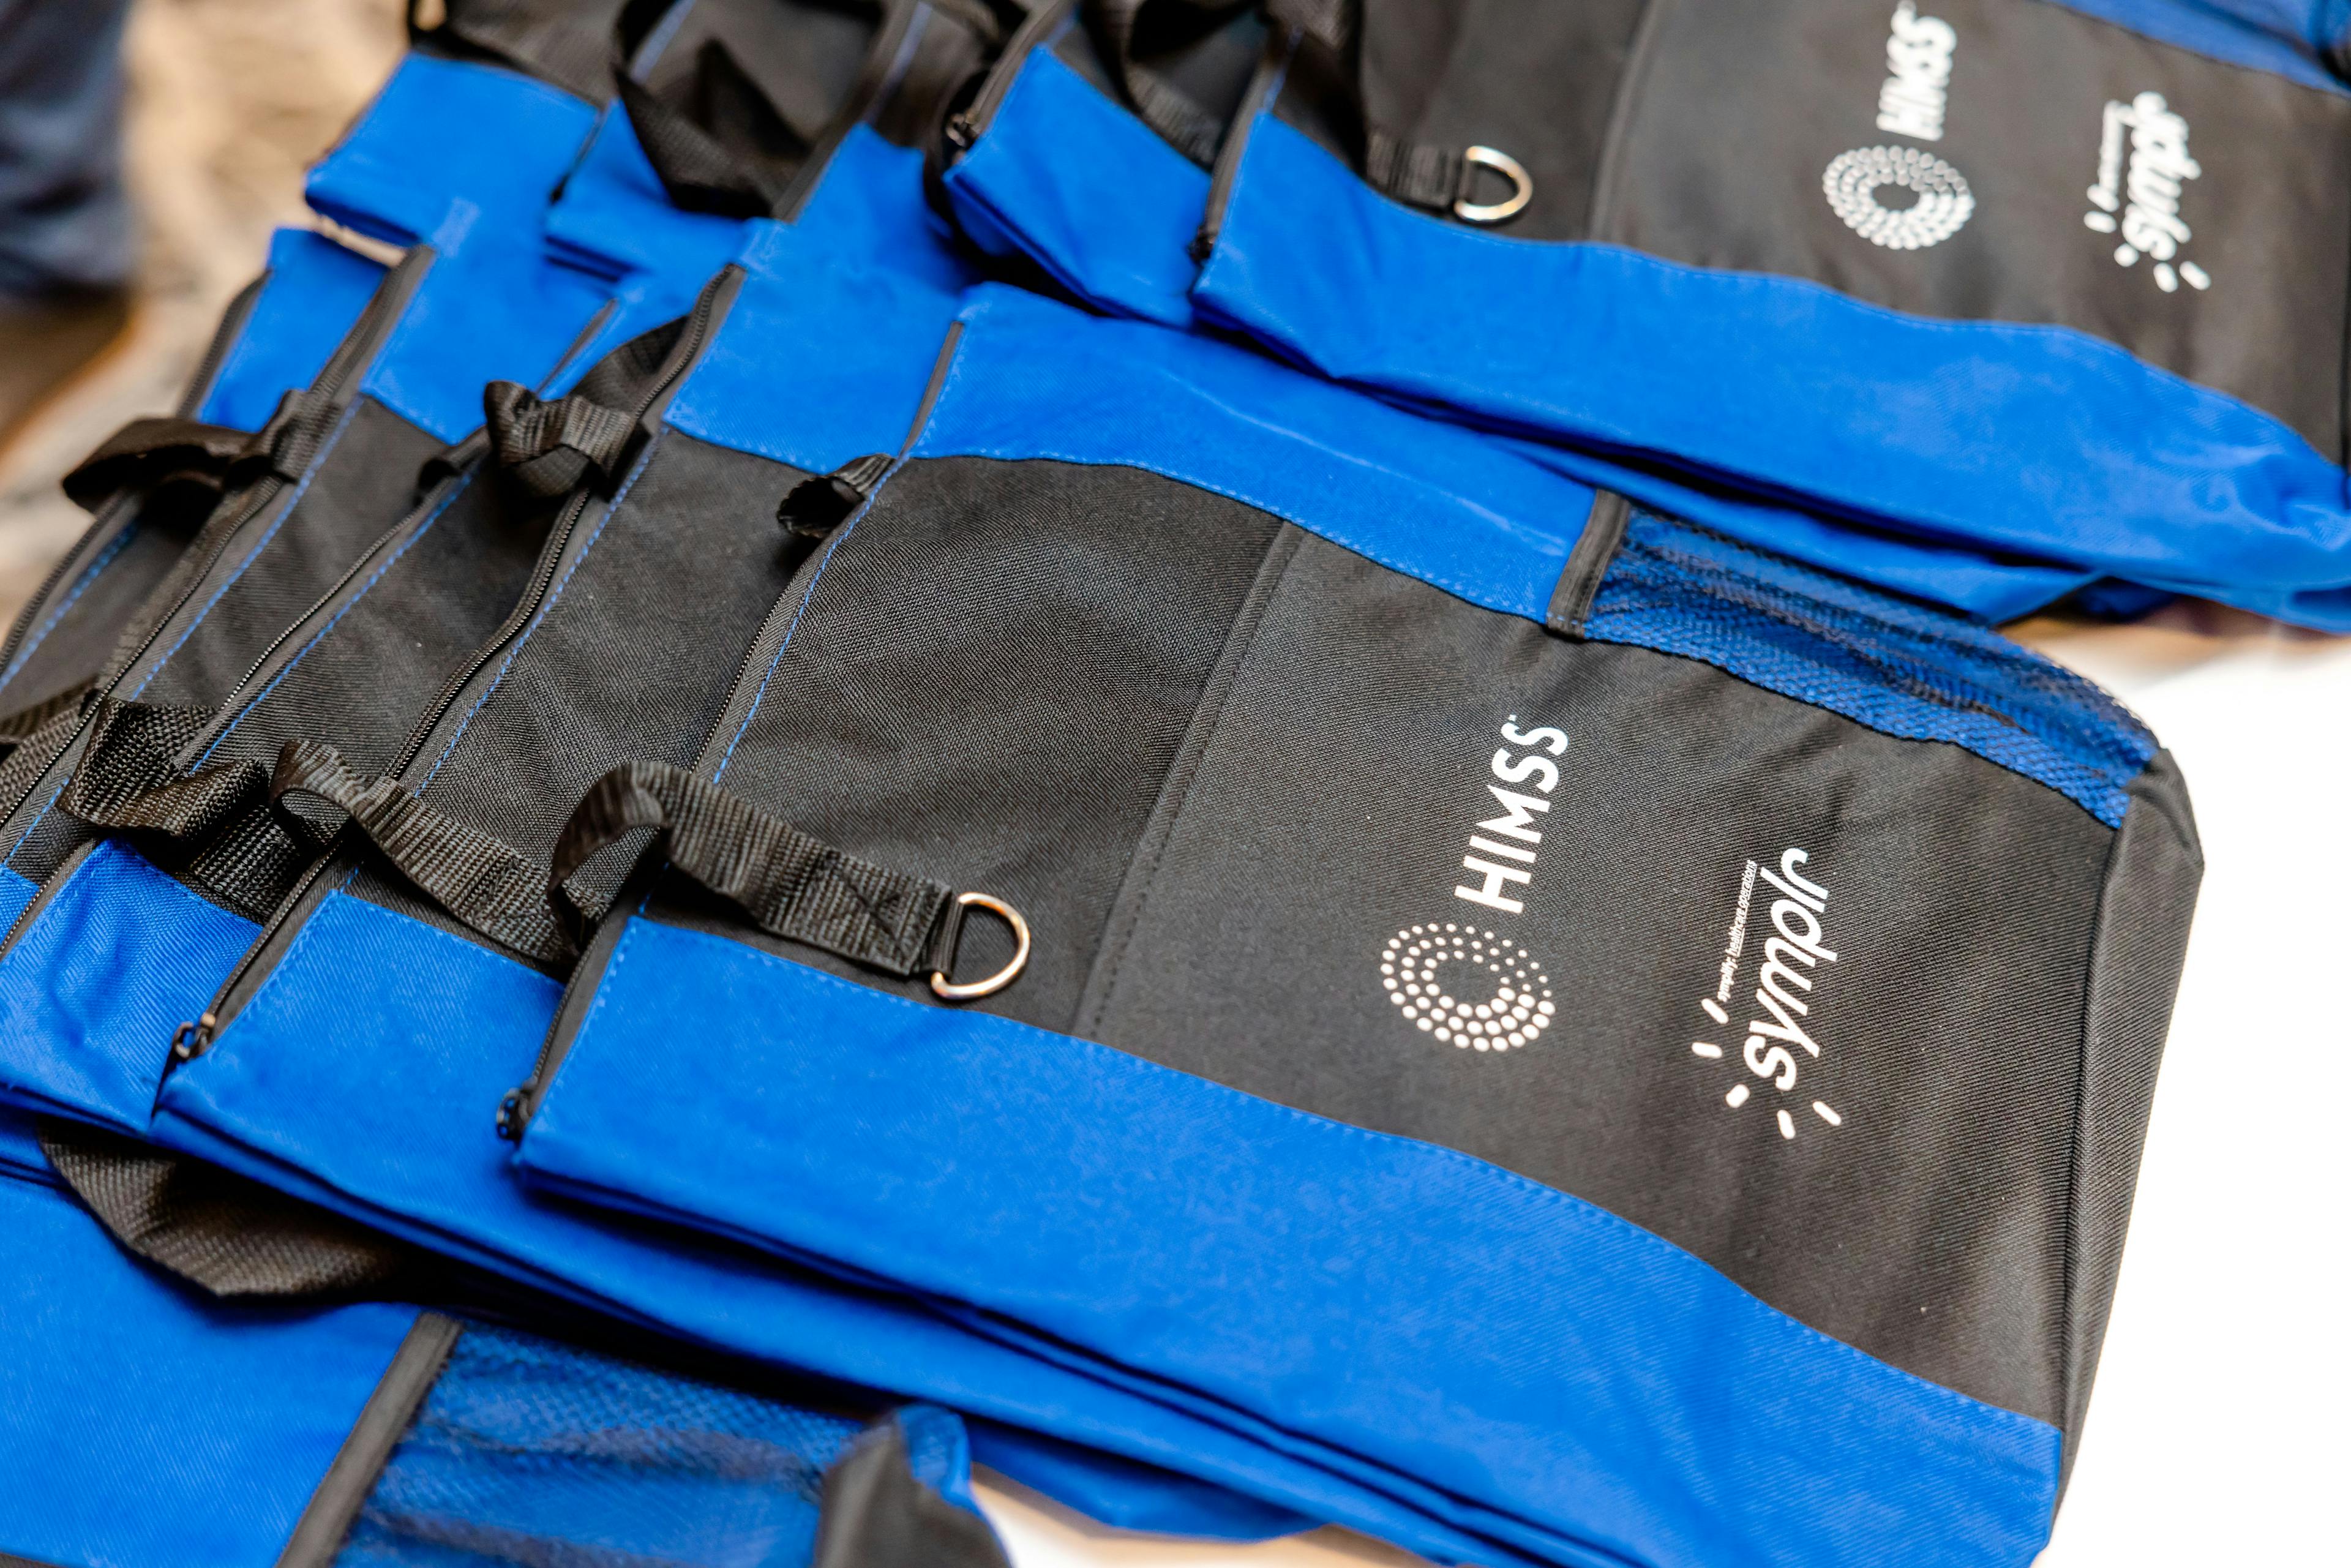 HIMSS Bags Courtesy of HIMSS | © Lotus Eyes Photography